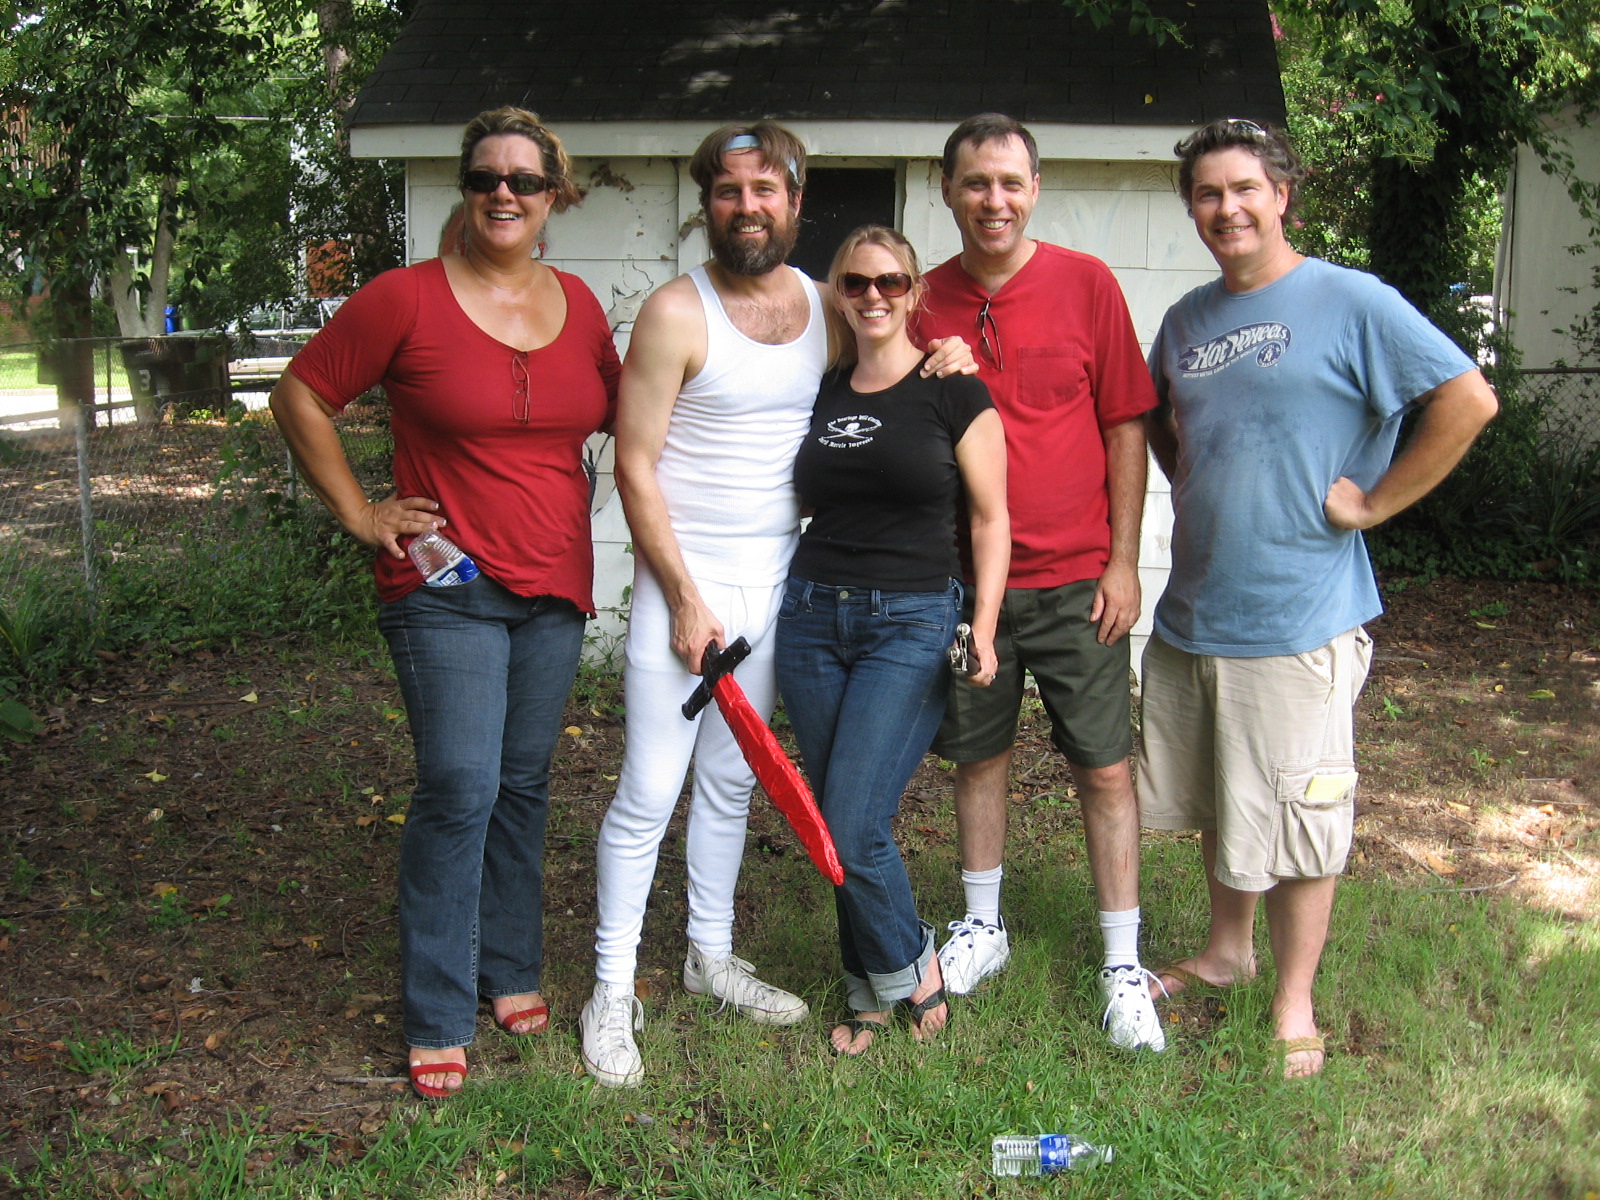 Caryn Nowland, Scott Rollins, Leslie North-Whitehead, John Pycoir, and Terry Jernigan on the set of CARDBOARD KNIGHT